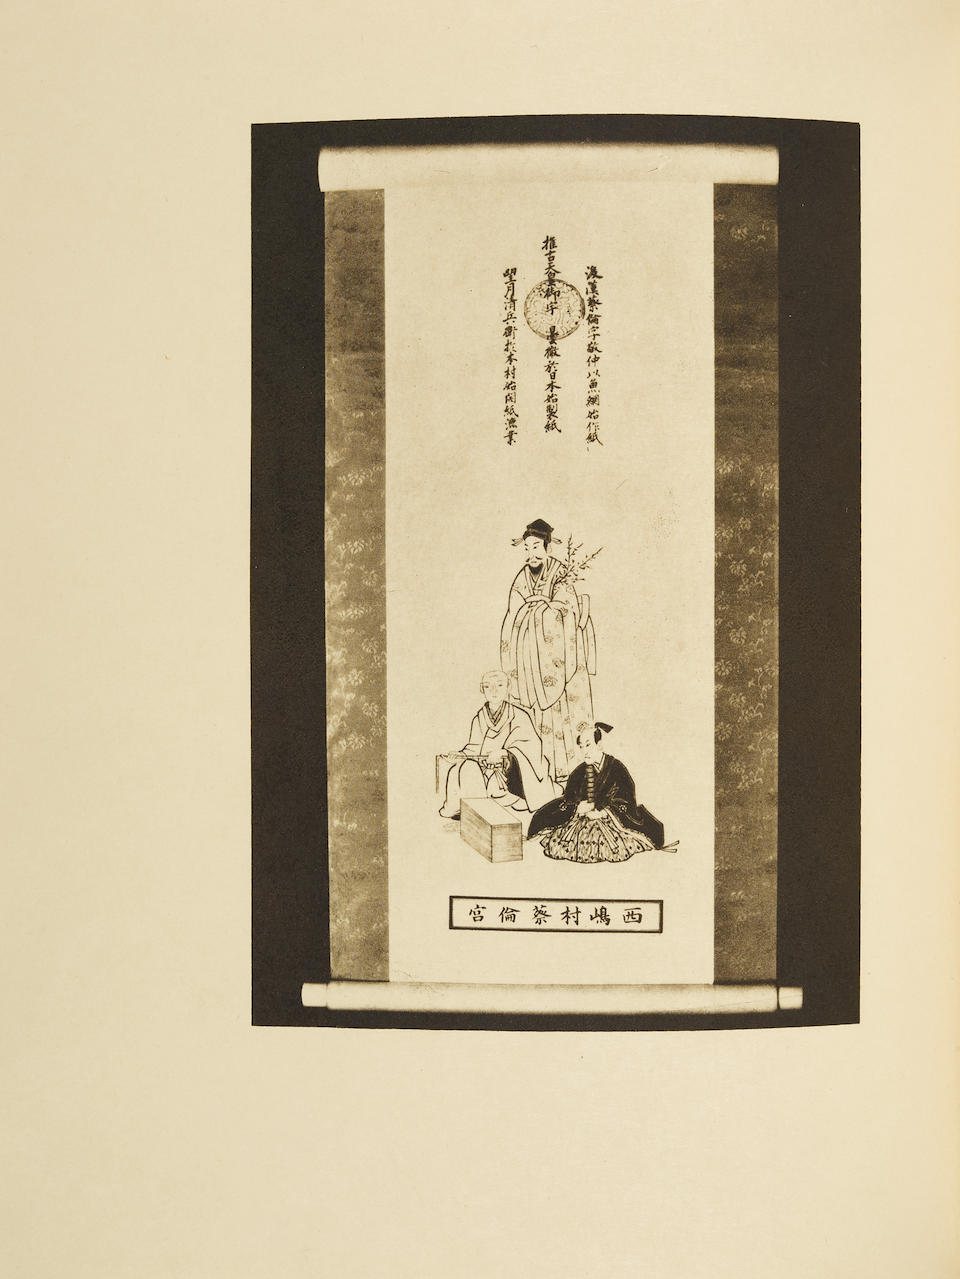 HUNTER, DARD. 1883-1966.  A Papermaking Pilgrimage to Japan, Korea, and China. New York: Pynson Printers, 1936.